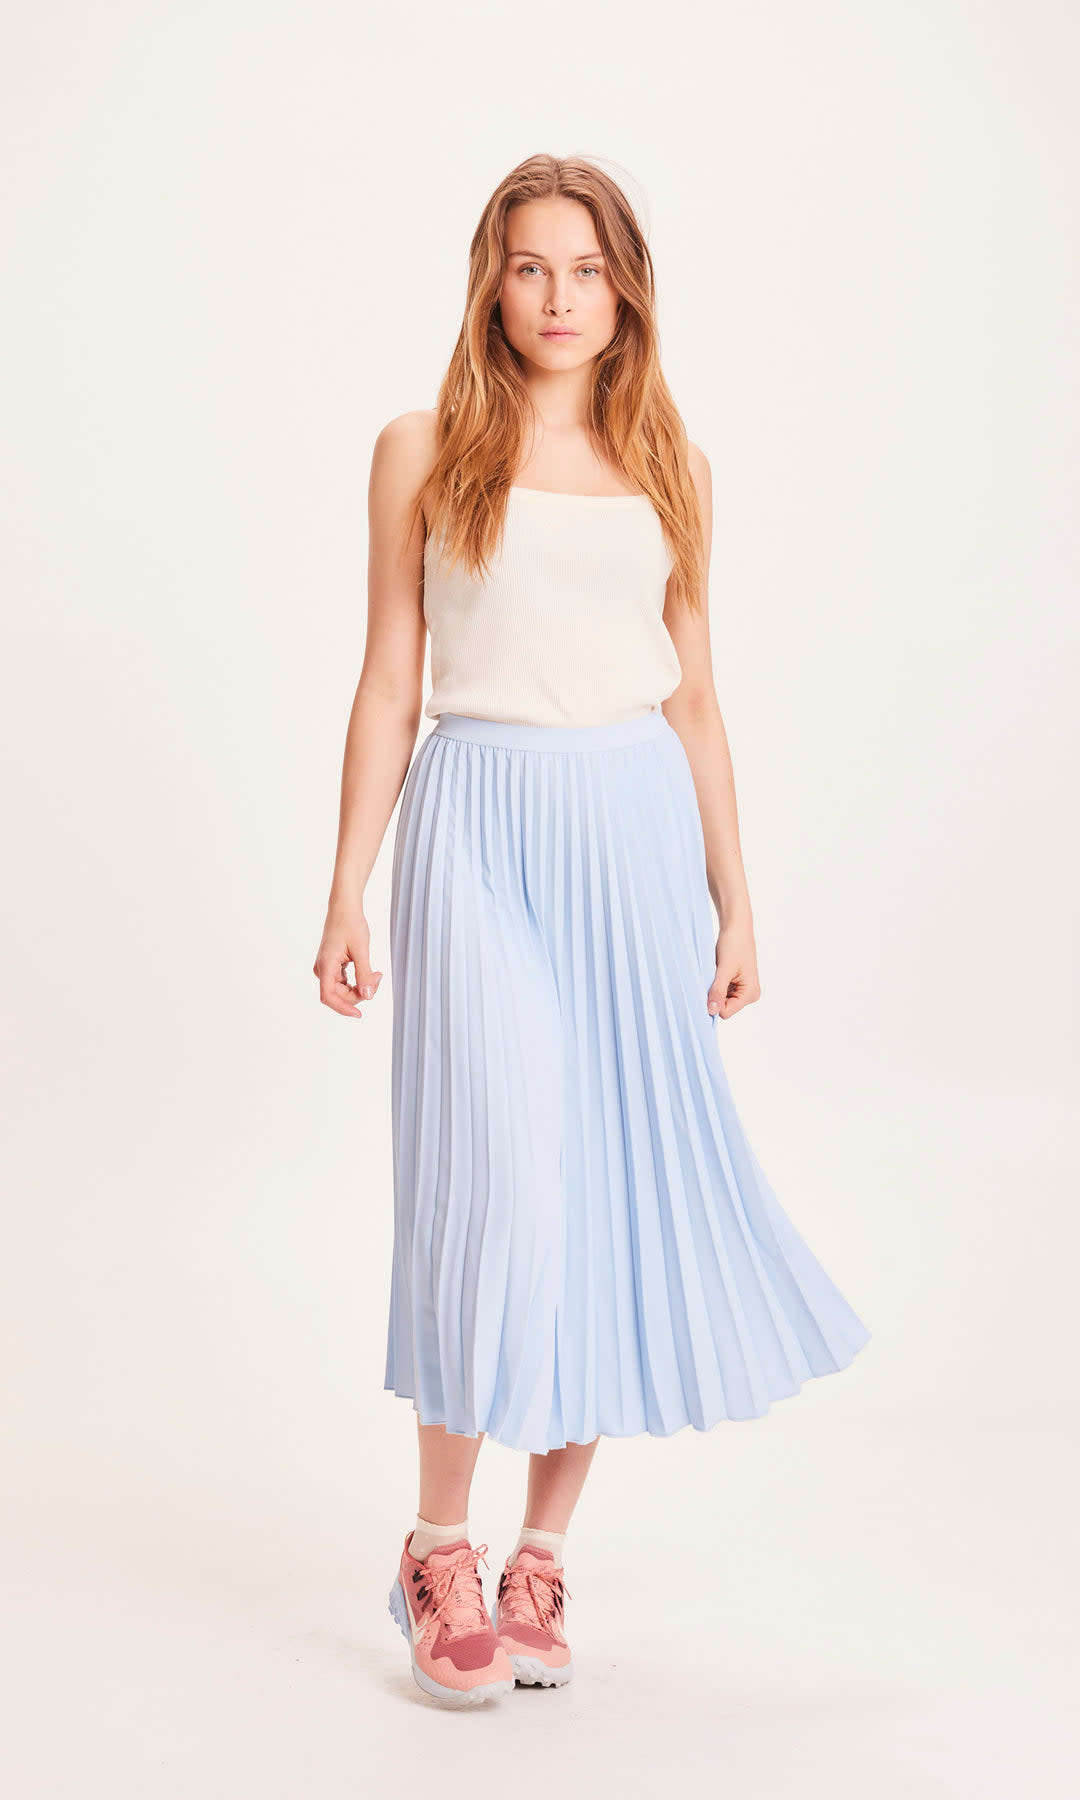 KnowledgeCotton Apparel KnowledgeCotton, Daffodil Pleated Midi Skirt, chambray blue, L